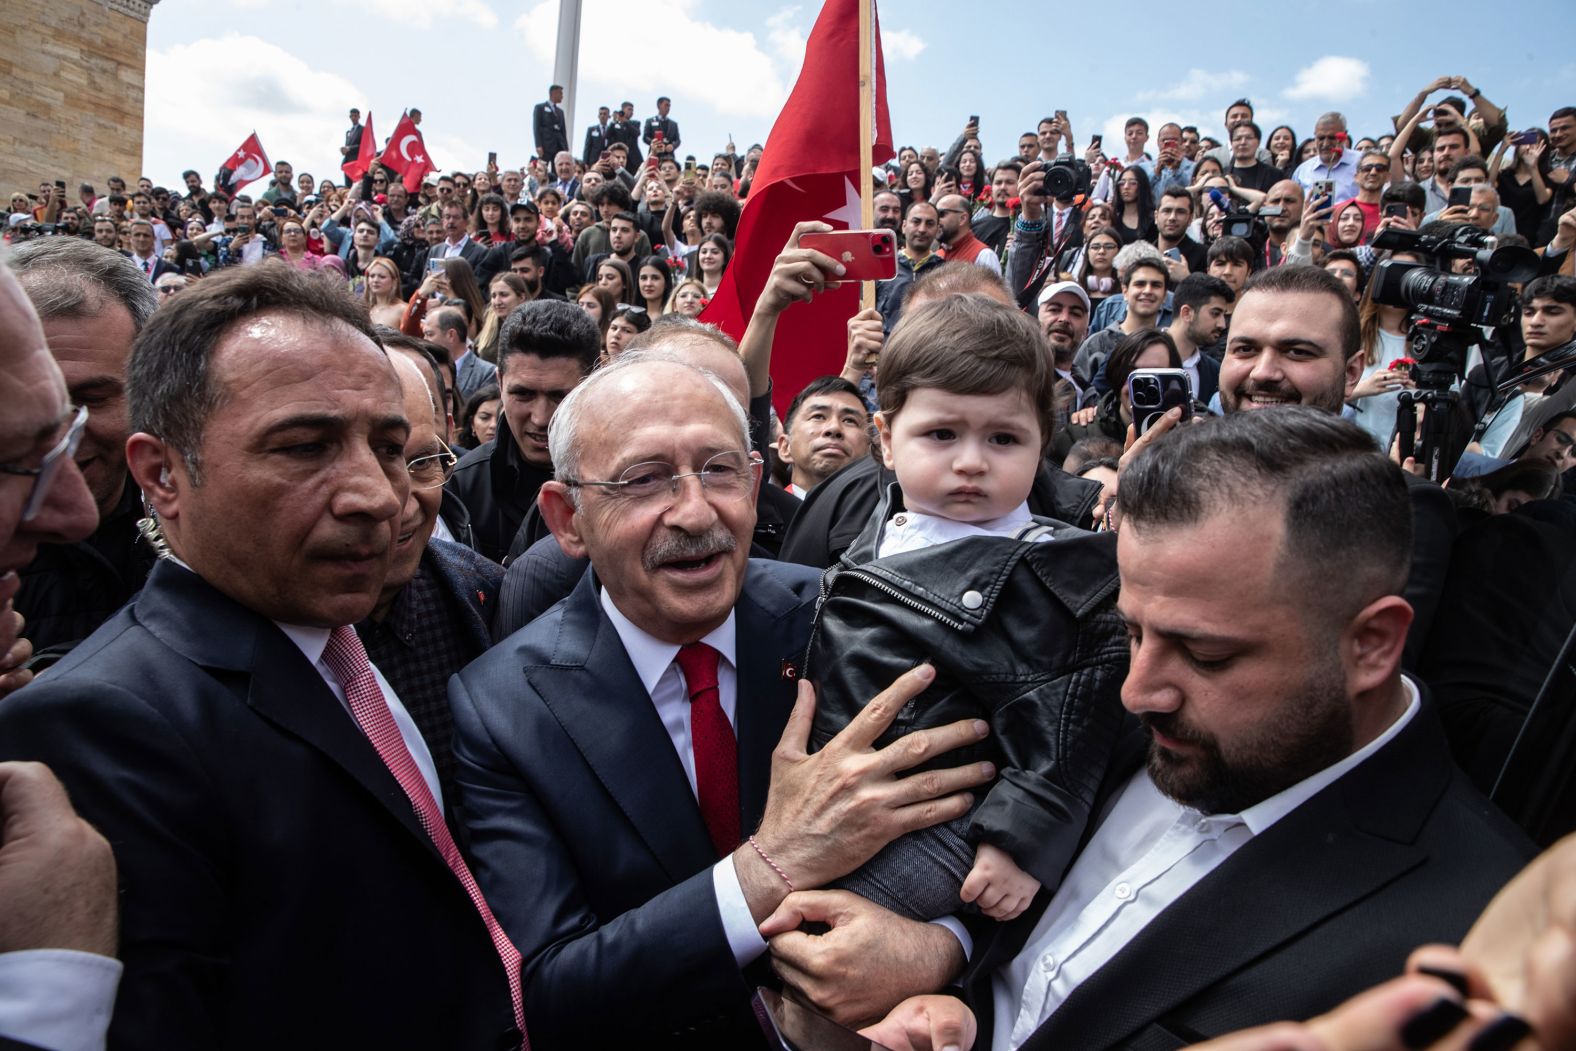 Turkish presidential candidate Kemal Kilicdaroglu, center, meets with supporters in the country's capital of Ankara as he visits Anitkabir, the mausoleum of the founder of modern Turkey, on Saturday, May 13. Turkey's fiercely contested presidential election is <a href="index.php?page=&url=https%3A%2F%2Fwww.cnn.com%2F2023%2F05%2F15%2Feurope%2Fturkey-runoff-elections-erdogan-kilicdaroglu-intl%2Findex.html" target="_blank">heading to a runoff</a> after neither Kilicdaroglu nor <a href="index.php?page=&url=https%3A%2F%2Fwww.cnn.com%2F2023%2F05%2F12%2Fmiddleeast%2Fgallery%2Frecep-tayyip-erdogan%2Findex.html" target="_blank">President Recep Tayyip Erdogan</a> was able to secure 50% of the vote.